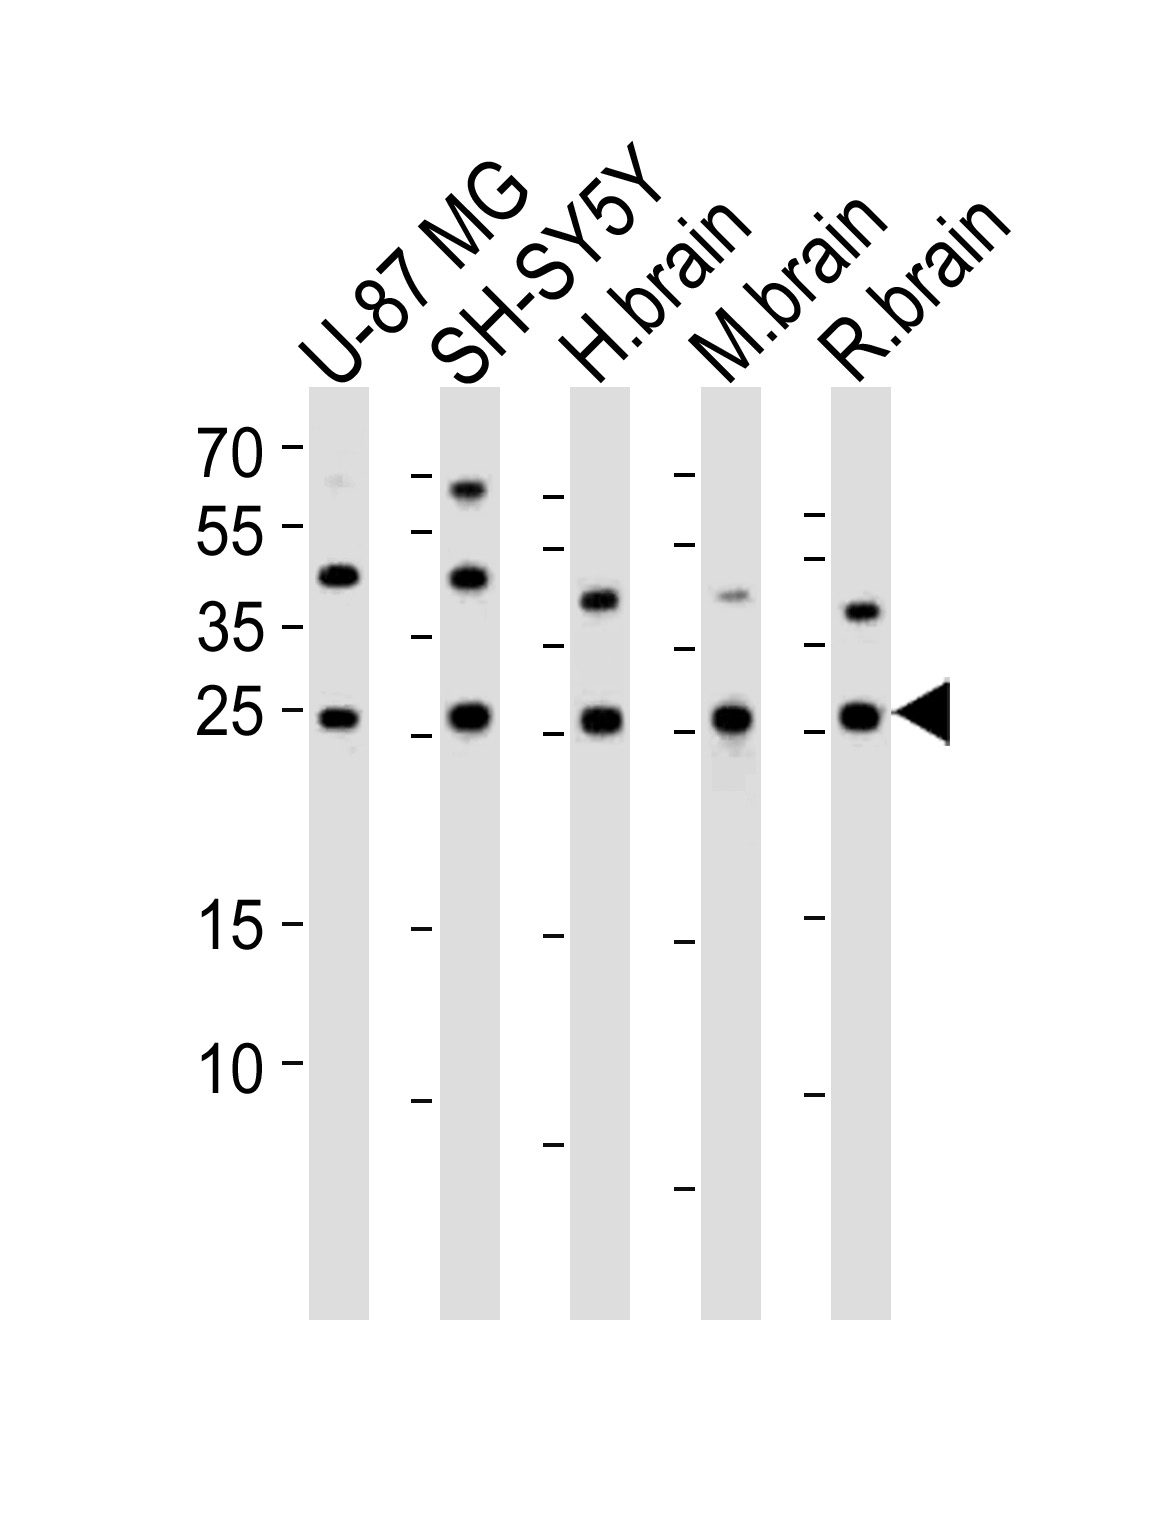 Western blot analysis of lysates from U-87 MG,  SH-SY5Y cell line,  human brain,  mouse brain,  rat brain tissue lysate (from left to right),  using STMN2 Antibody (N-term)(Cat.  #AP20817a).  AP20817a was diluted at 1:1000 at each lane.  A goat anti-rabbit IgG H&L(HRP) at 1:10000 dilution was used as the secondary antibody. Lysates at 35ug per lane.